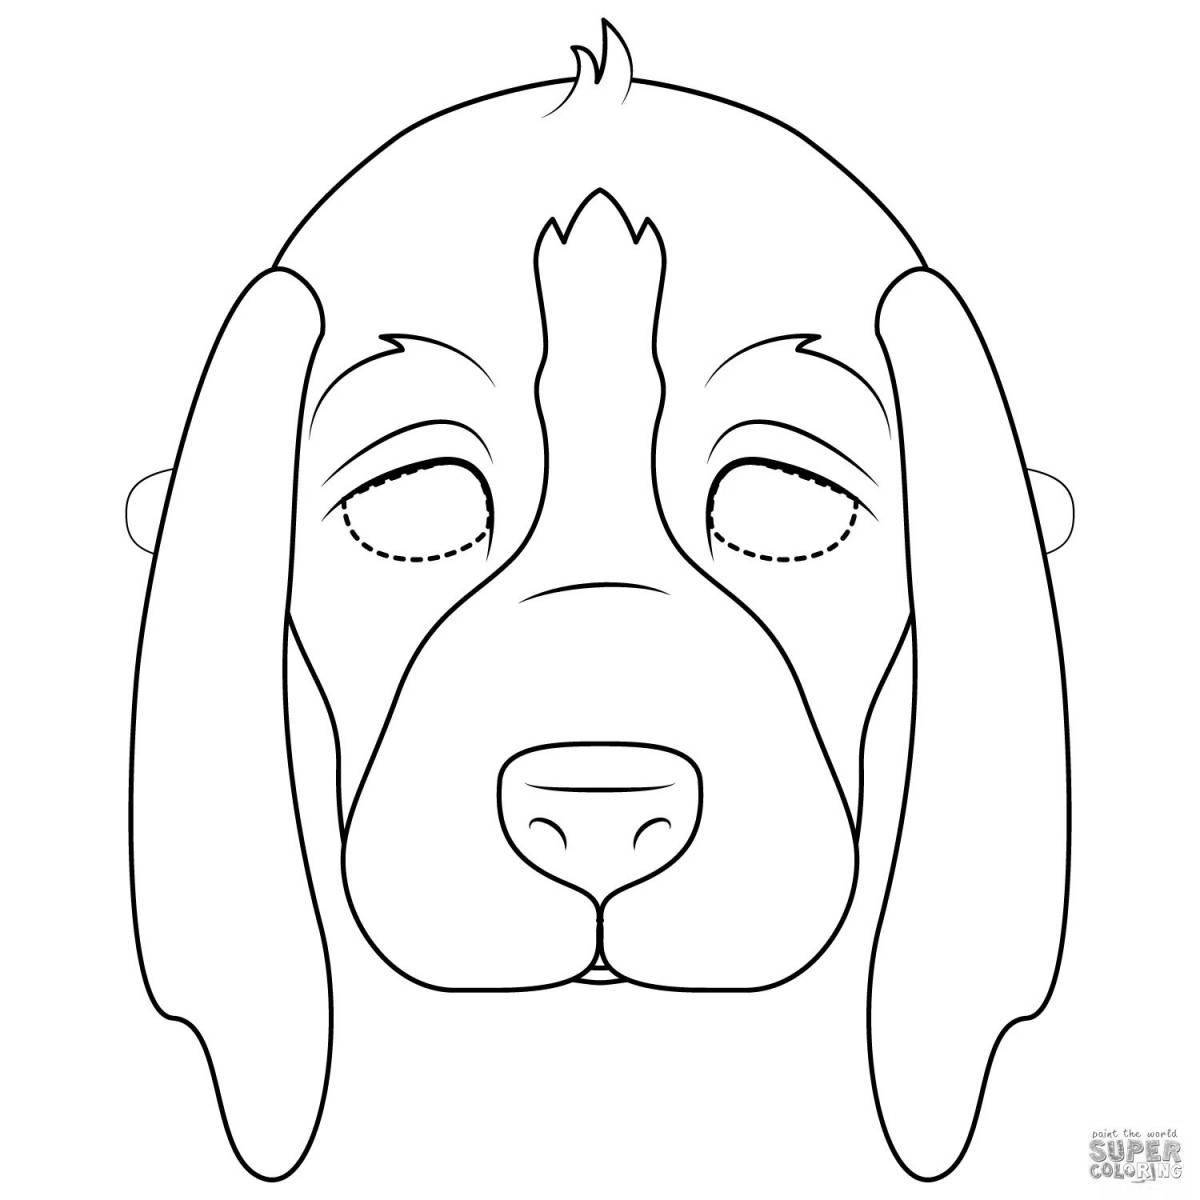 Cute dog face coloring page